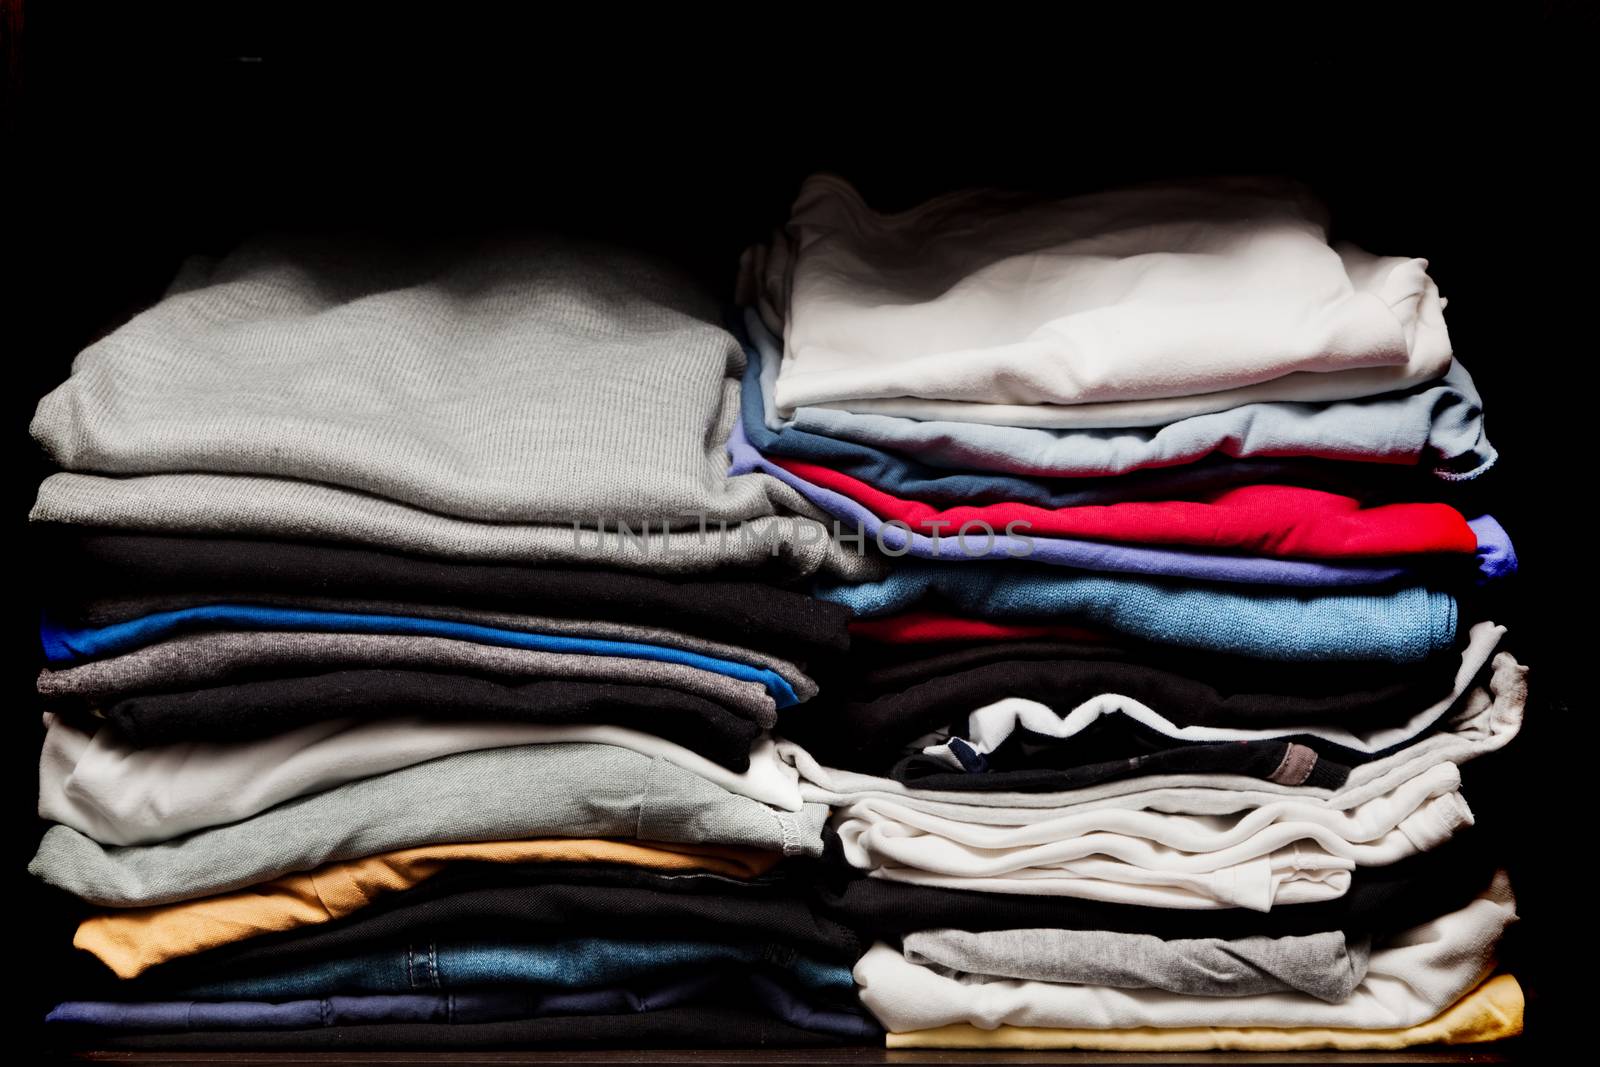 PIles of various clothes from laundry in a wardrobe. Black background